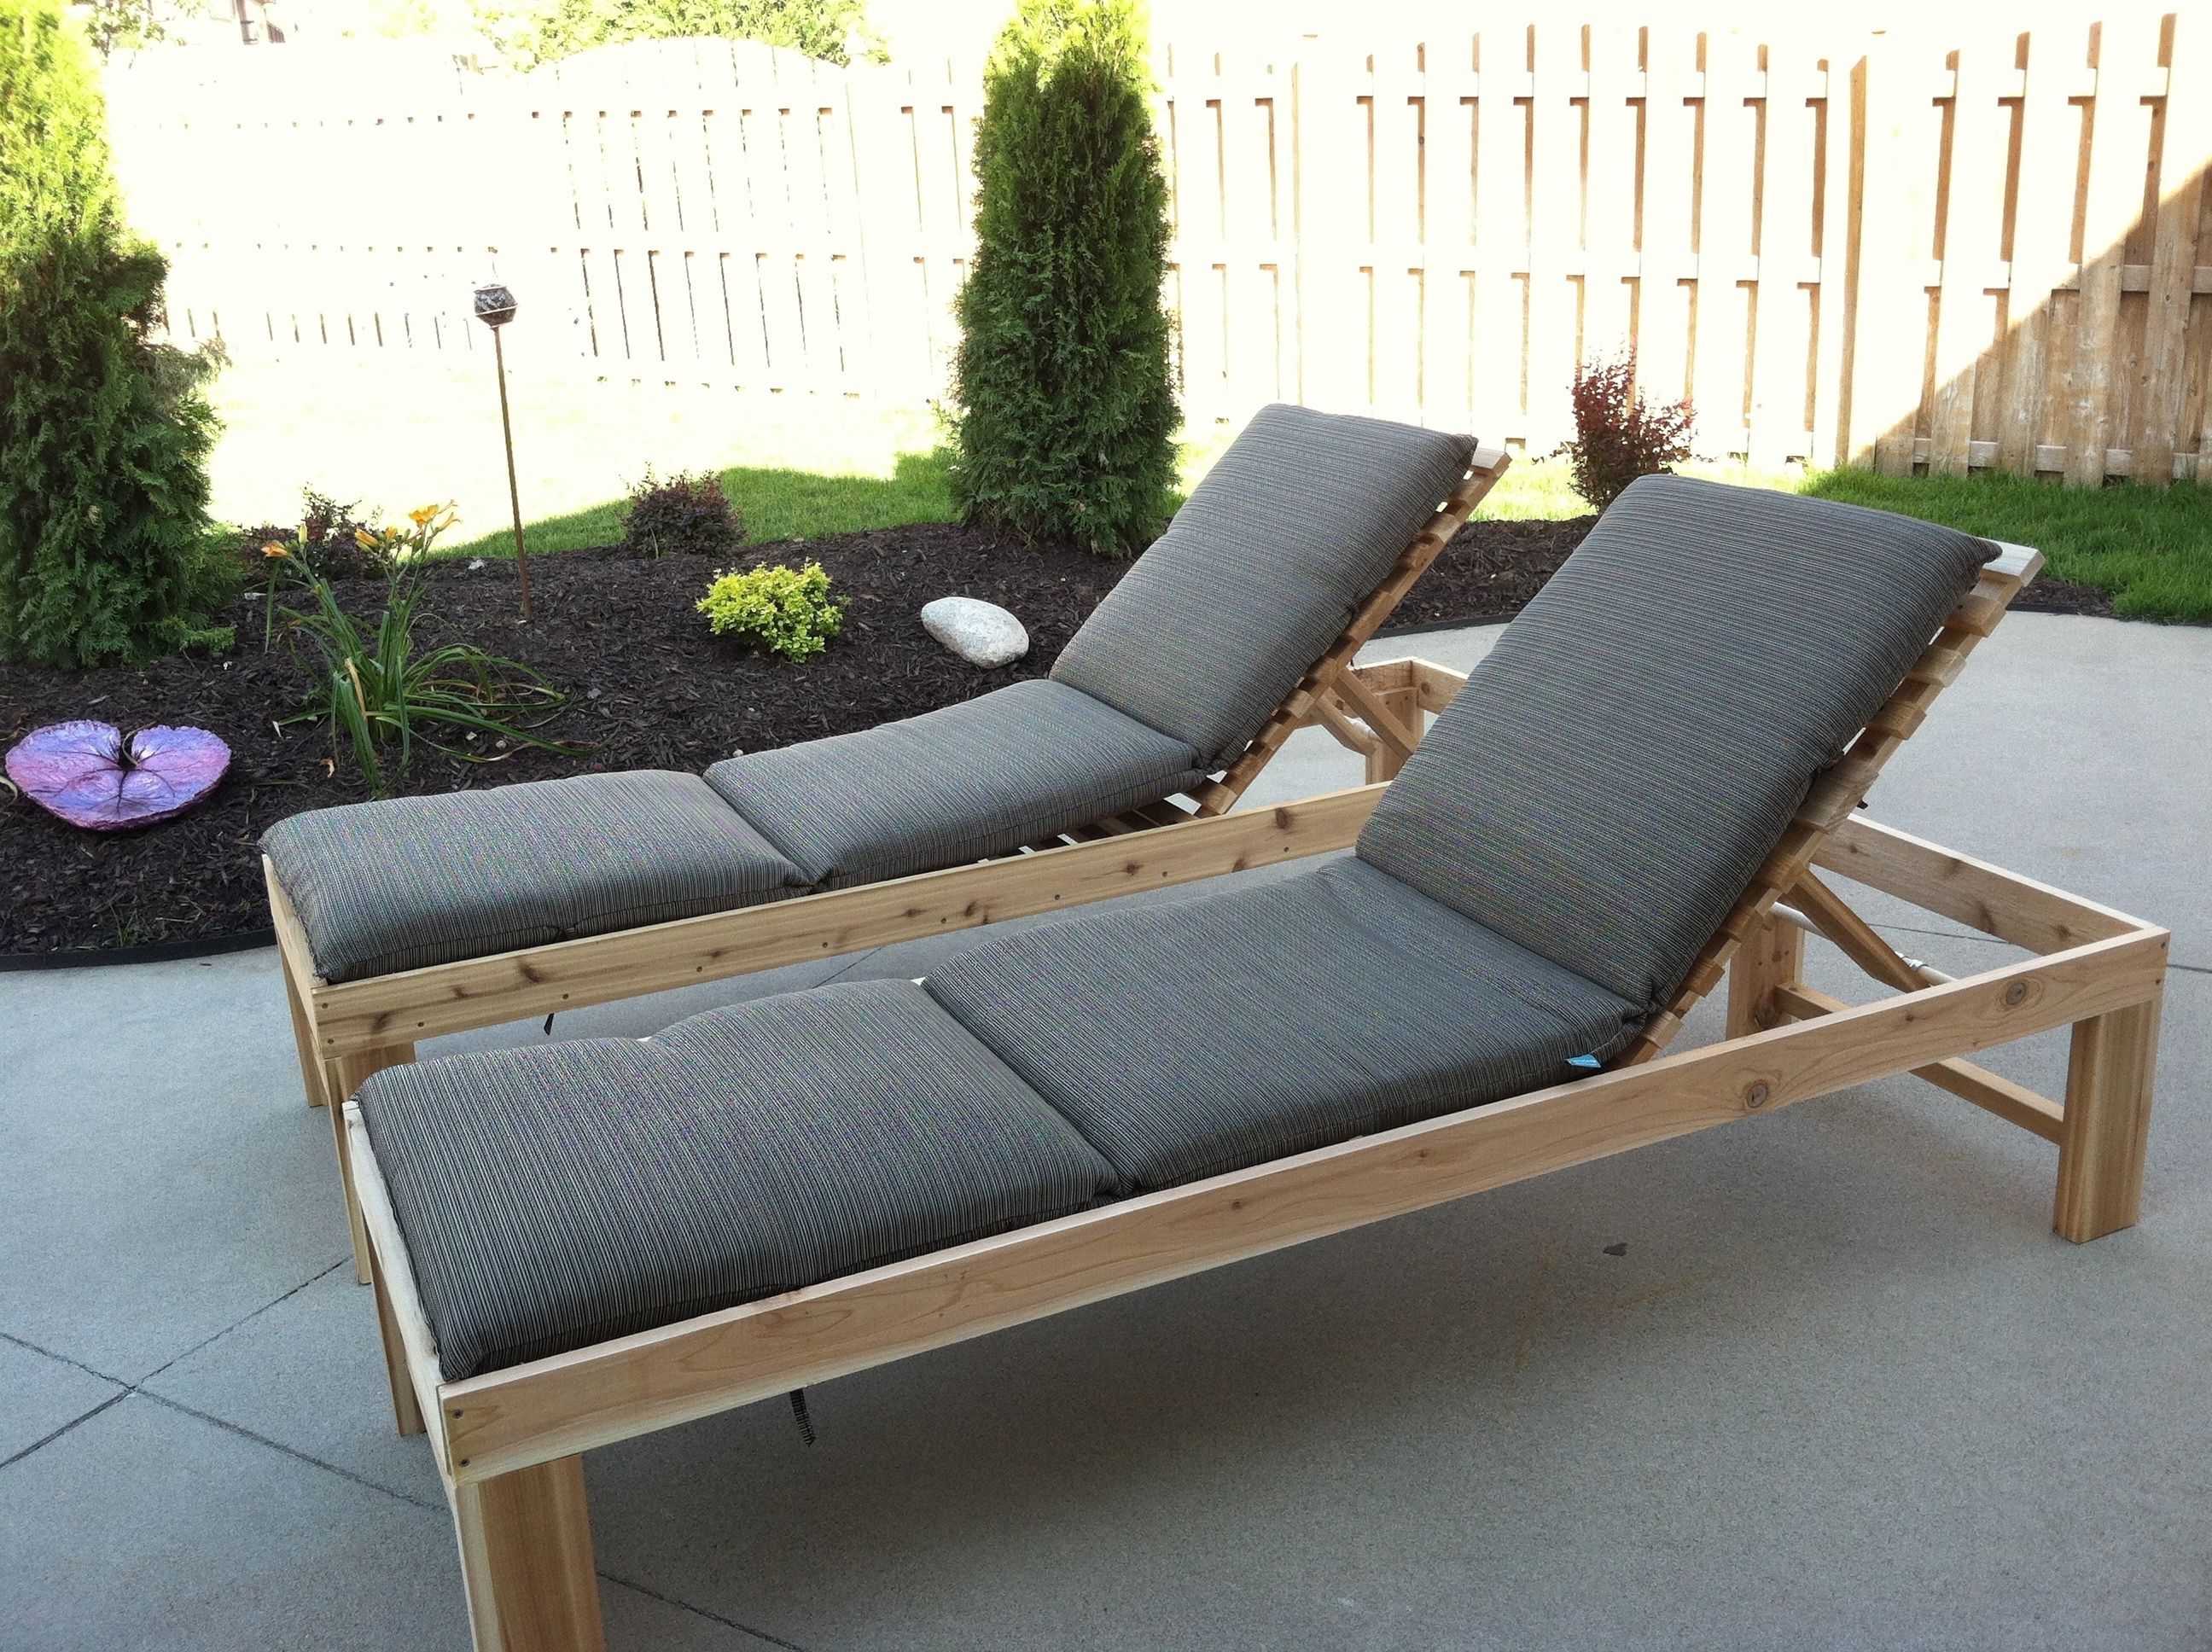 Lounge Chair : Chase Furniture Two Person Chaise Lounge Indoor With Current 2 Person Chaise Lounges (View 9 of 15)